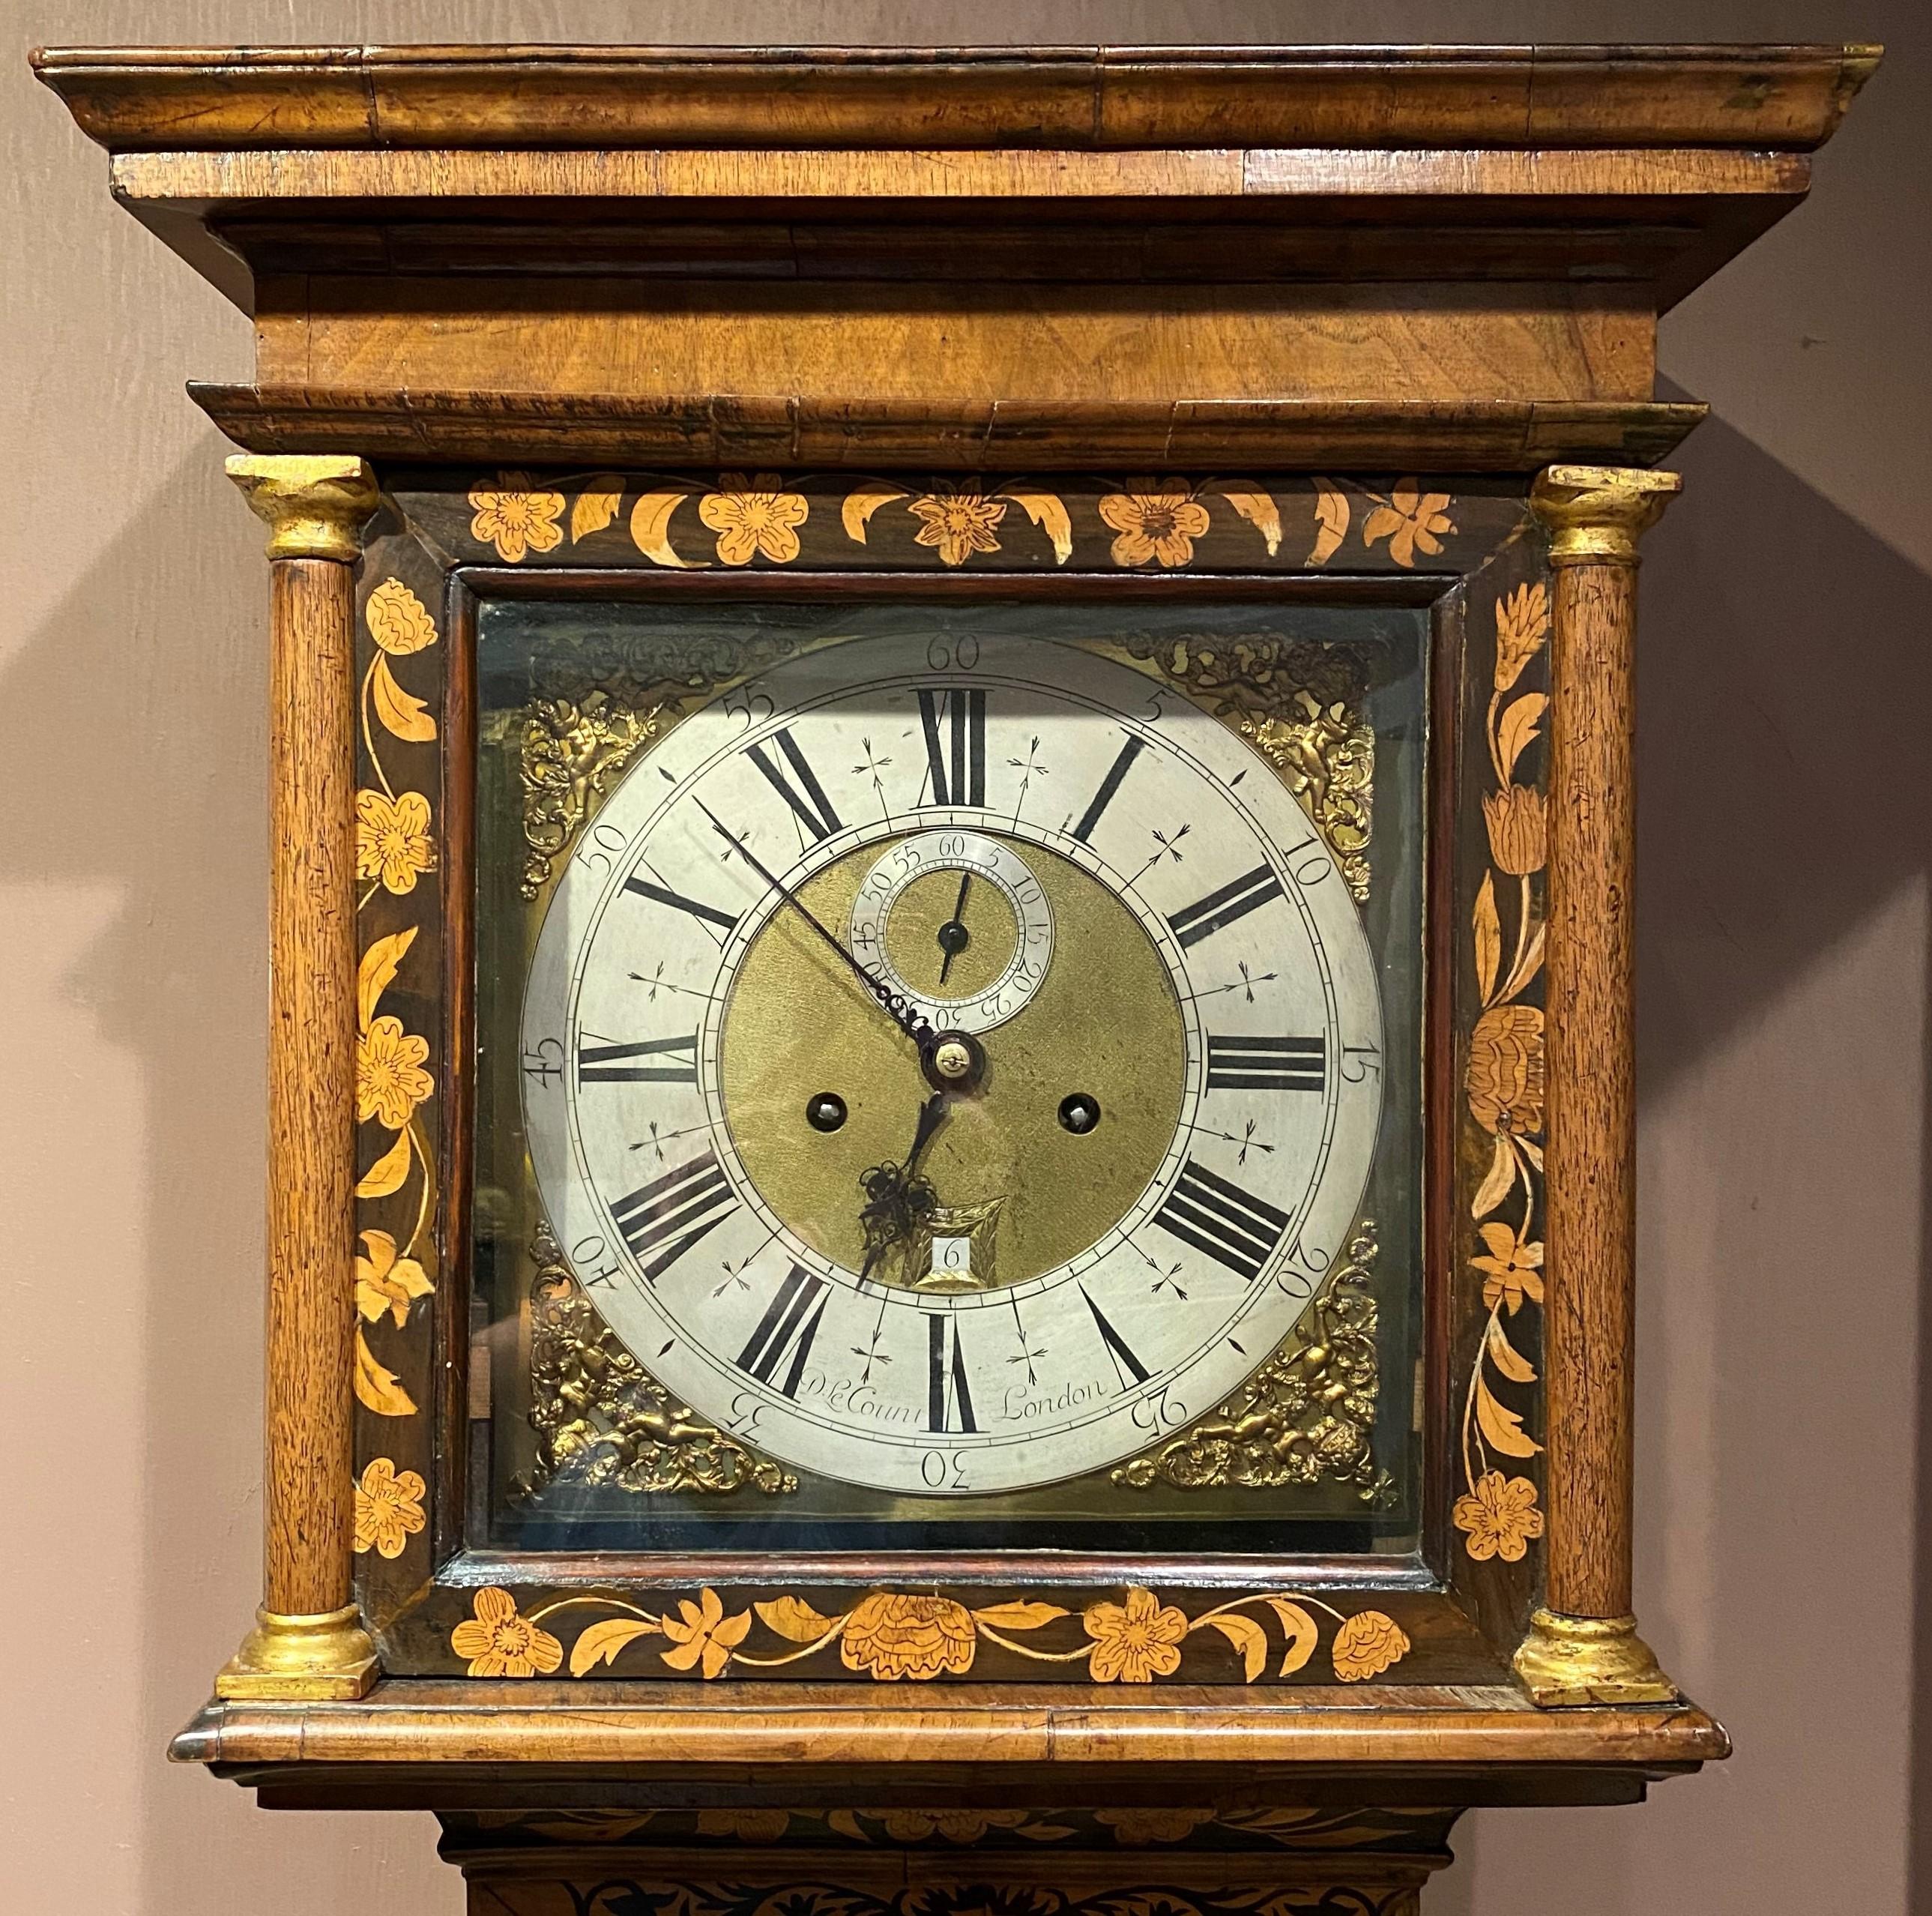 A fine and rare William & Mary long case or grandfather clock by London maker Daniel LeCompte. c.1690, London, the fine marquetry case having oval panels of birds and flowers, the movement signed Daniel LeCount (LeCompte) having a silver chapter